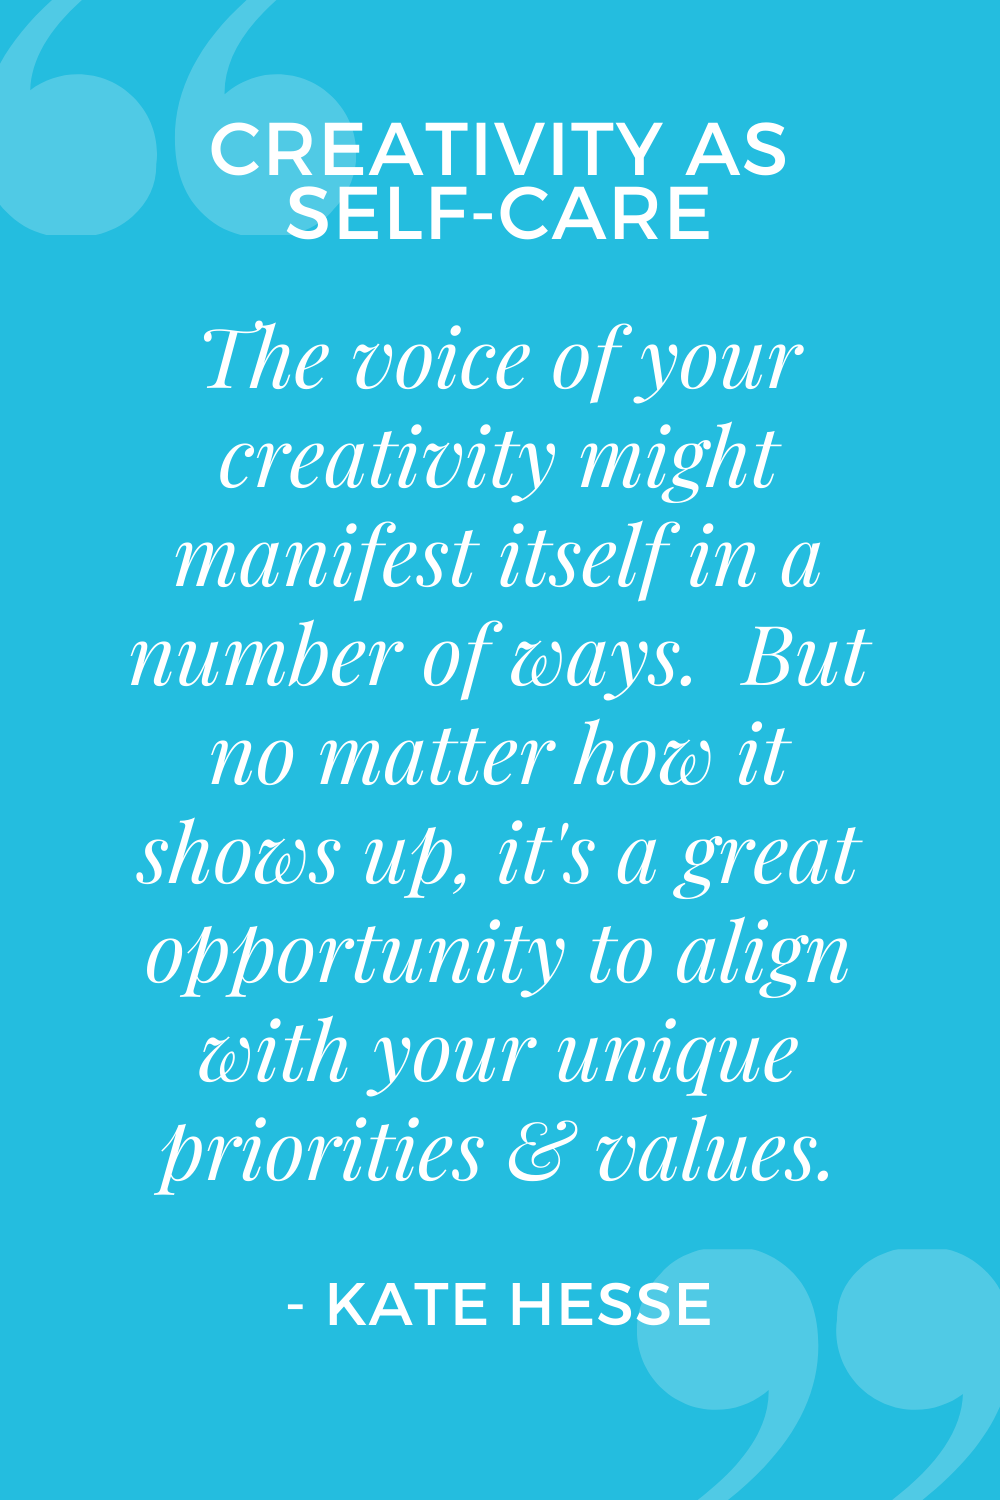 The voice of your creativity might manifest itself in a number of ways. But not matter how it shows up, it's a great opportunity to align with your unique priorities & values.